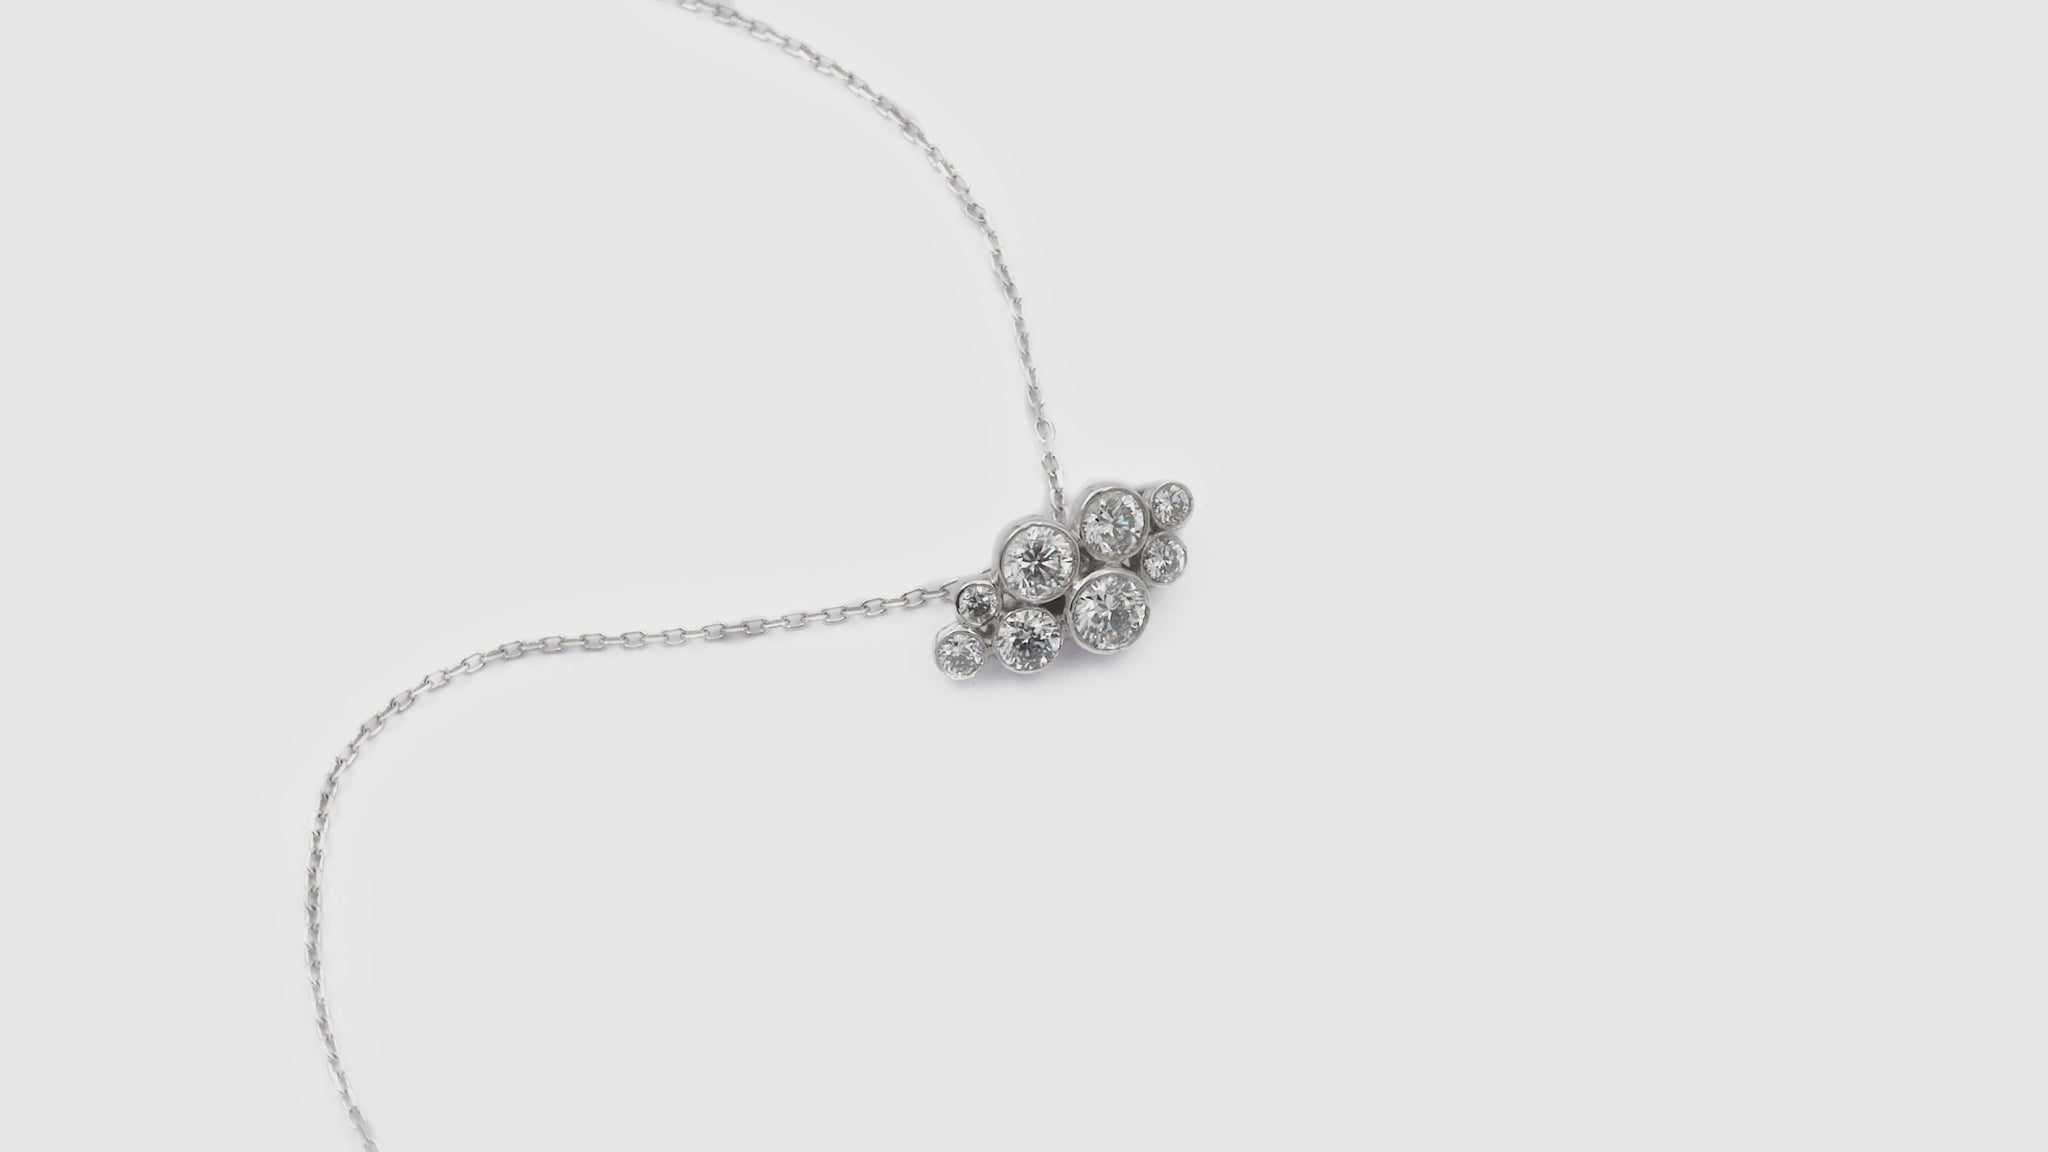 Bubbly necklace II - 14K white gold lab-grown diamond necklace - The Future Rocks